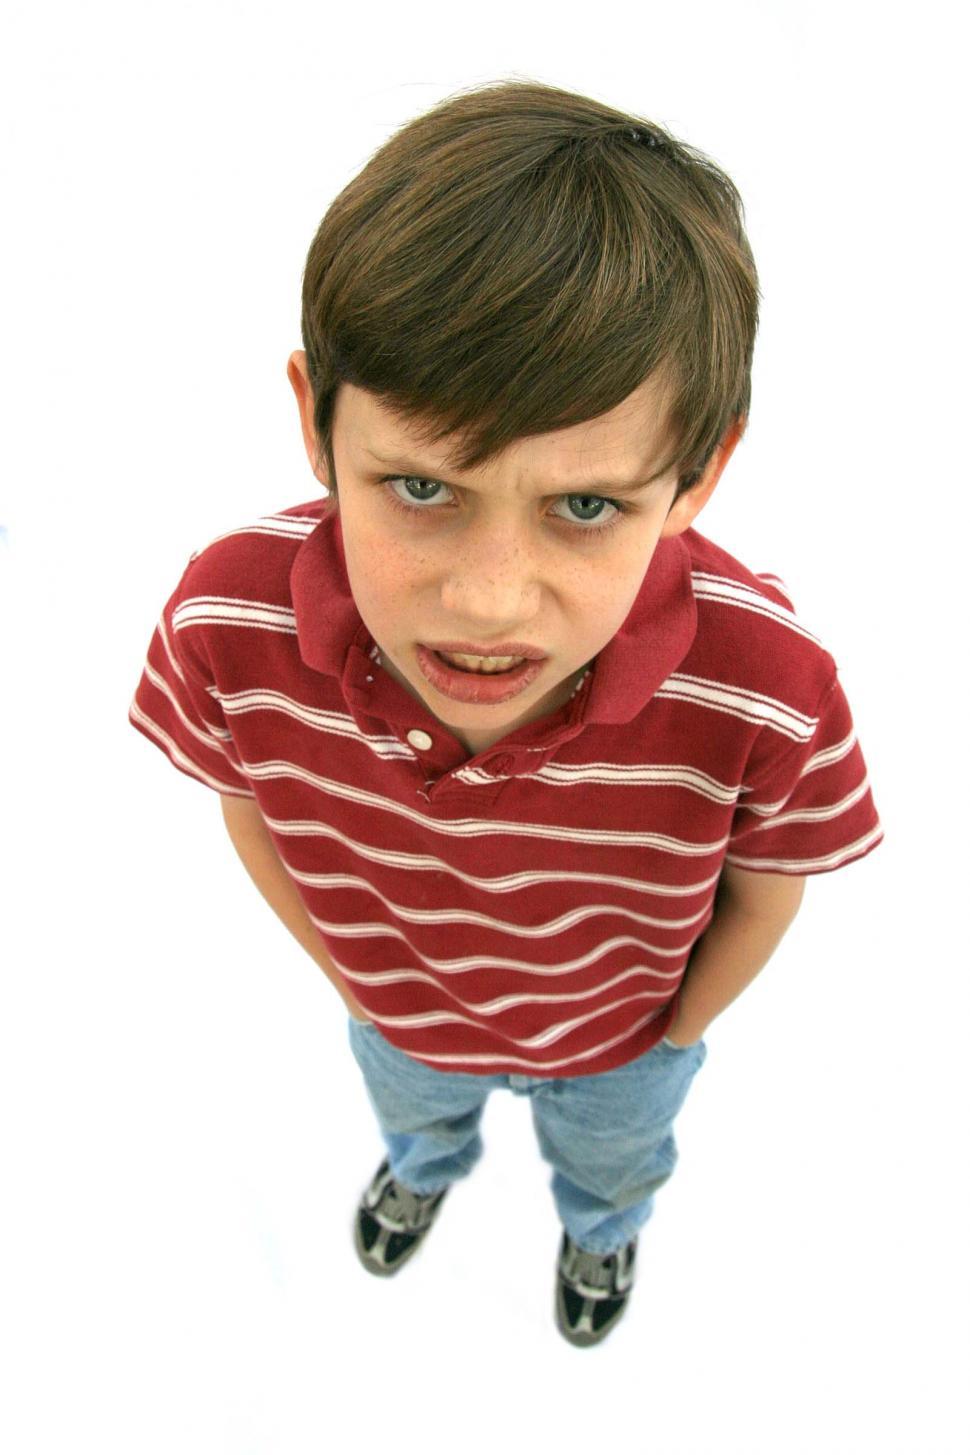 Free Image of Angry defiant little boy 